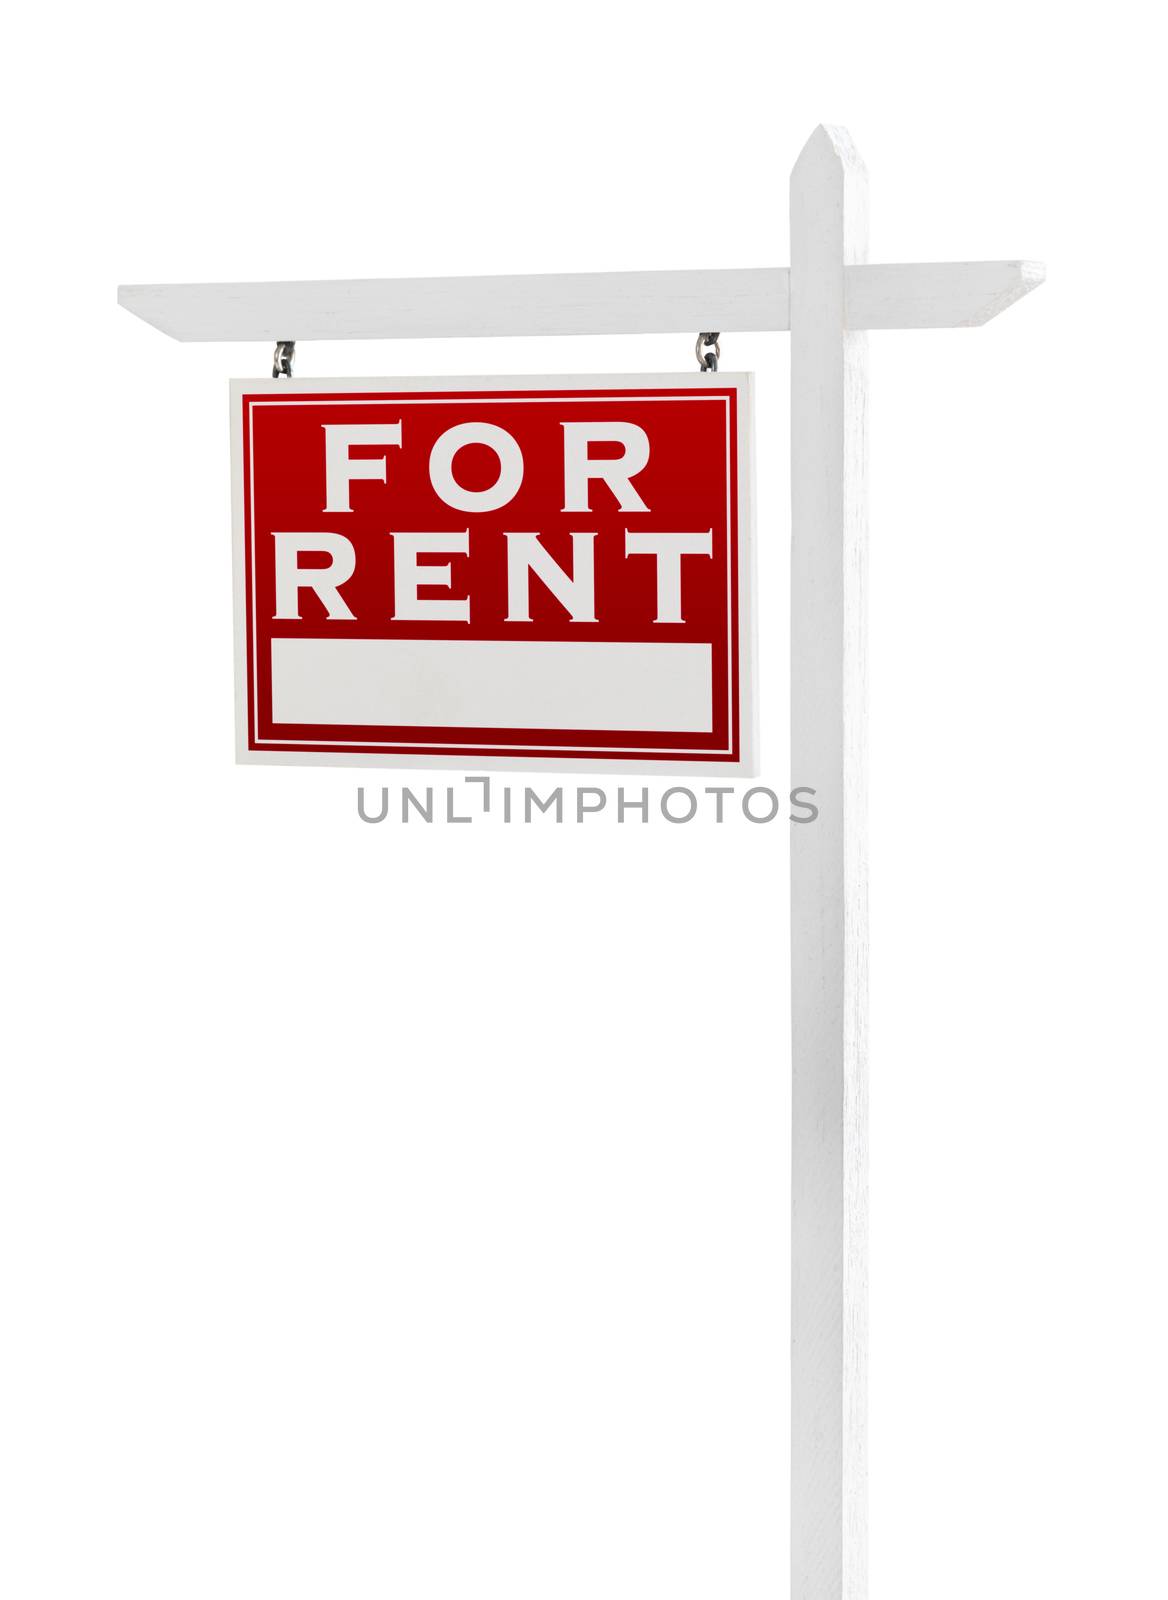 Left Facing For Rent Real Estate Sign Isolated on a White Backgound.